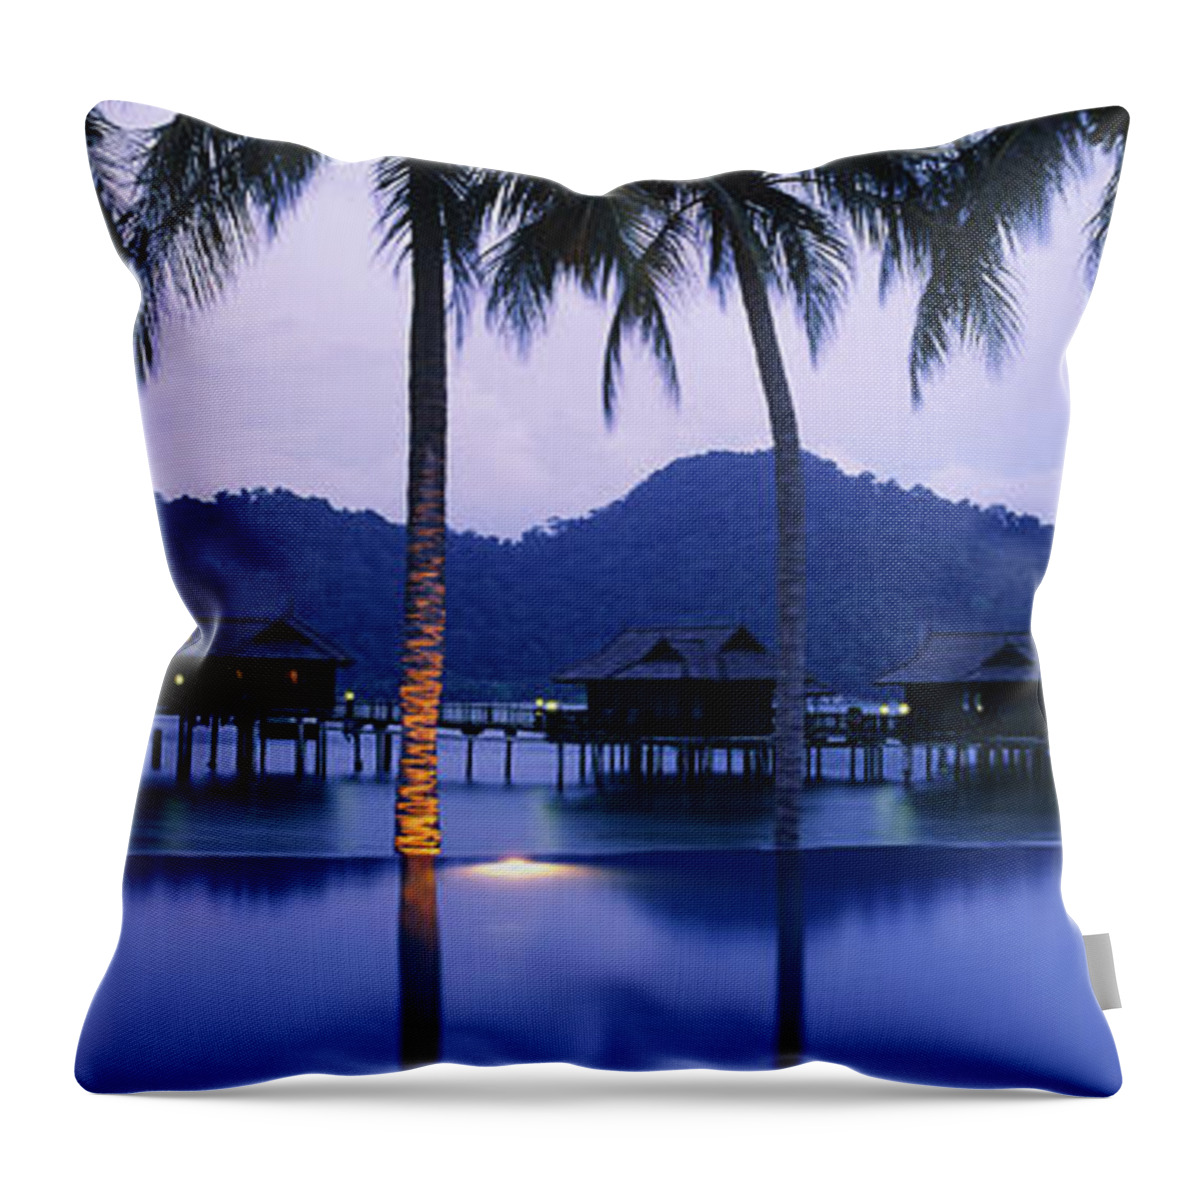 Fan Palm Tree Throw Pillow featuring the photograph Malaysia, Pangkor Laut Island, Dusk by Peter Adams